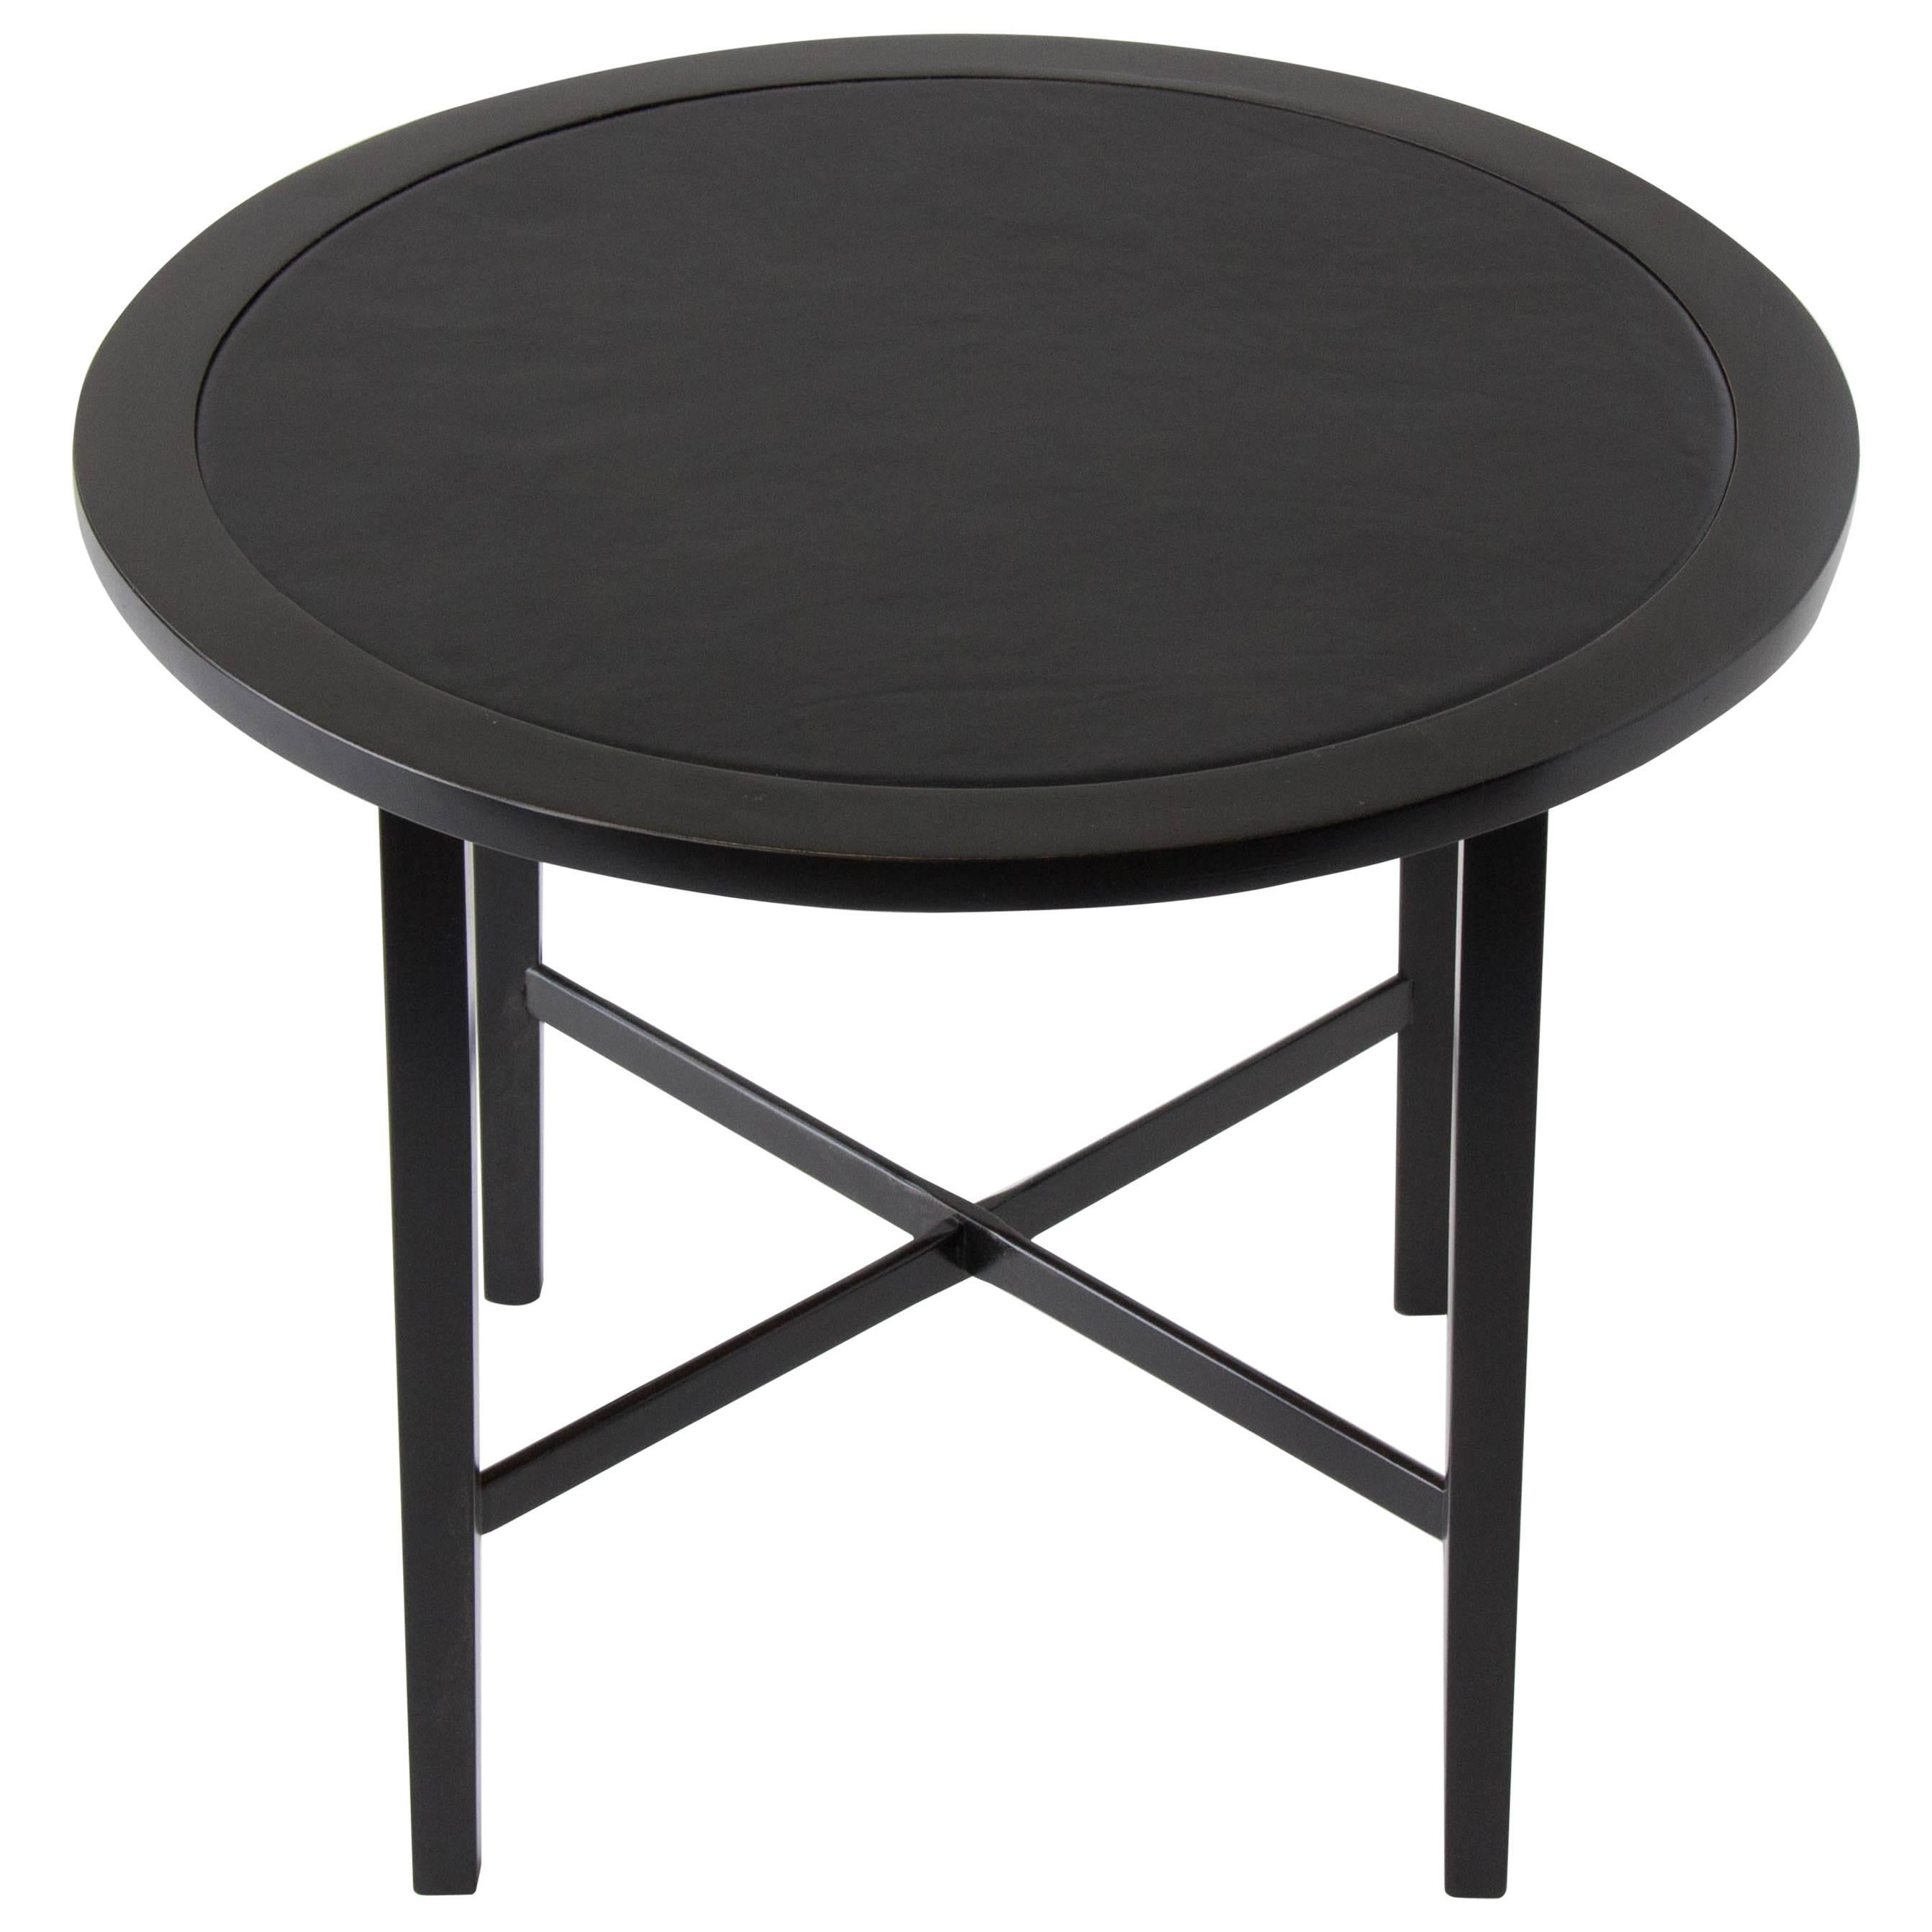 Paul McCobb Round Perimeter Group Side Table